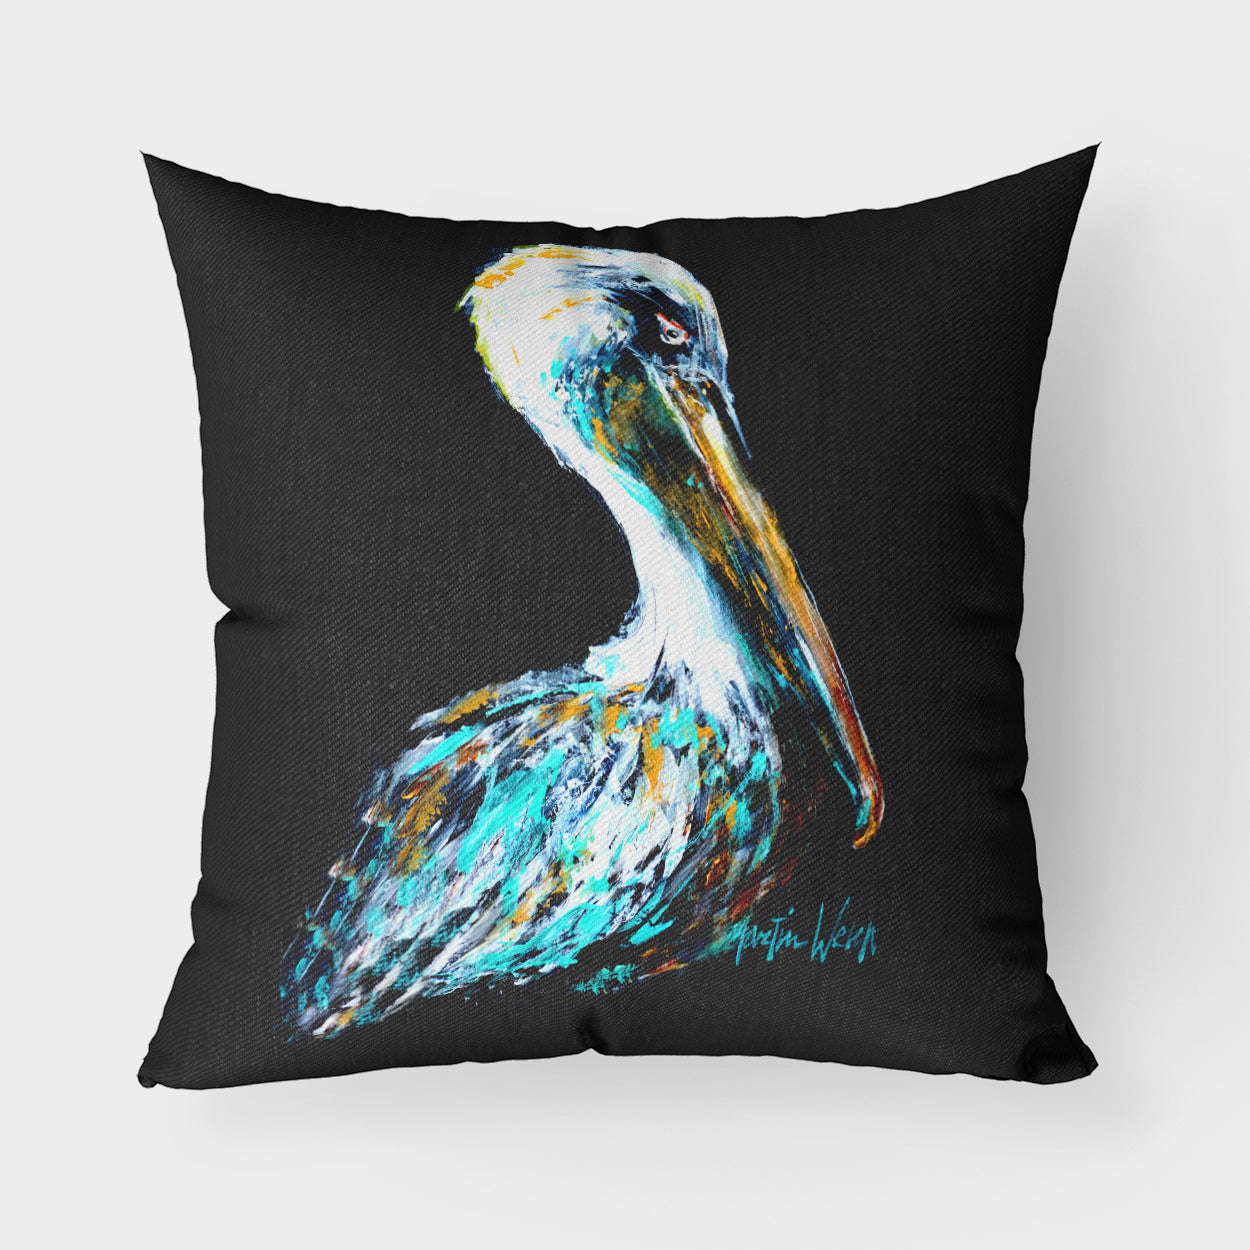 Buy this Dressed in Black Pelican Fabric Decorative Pillow